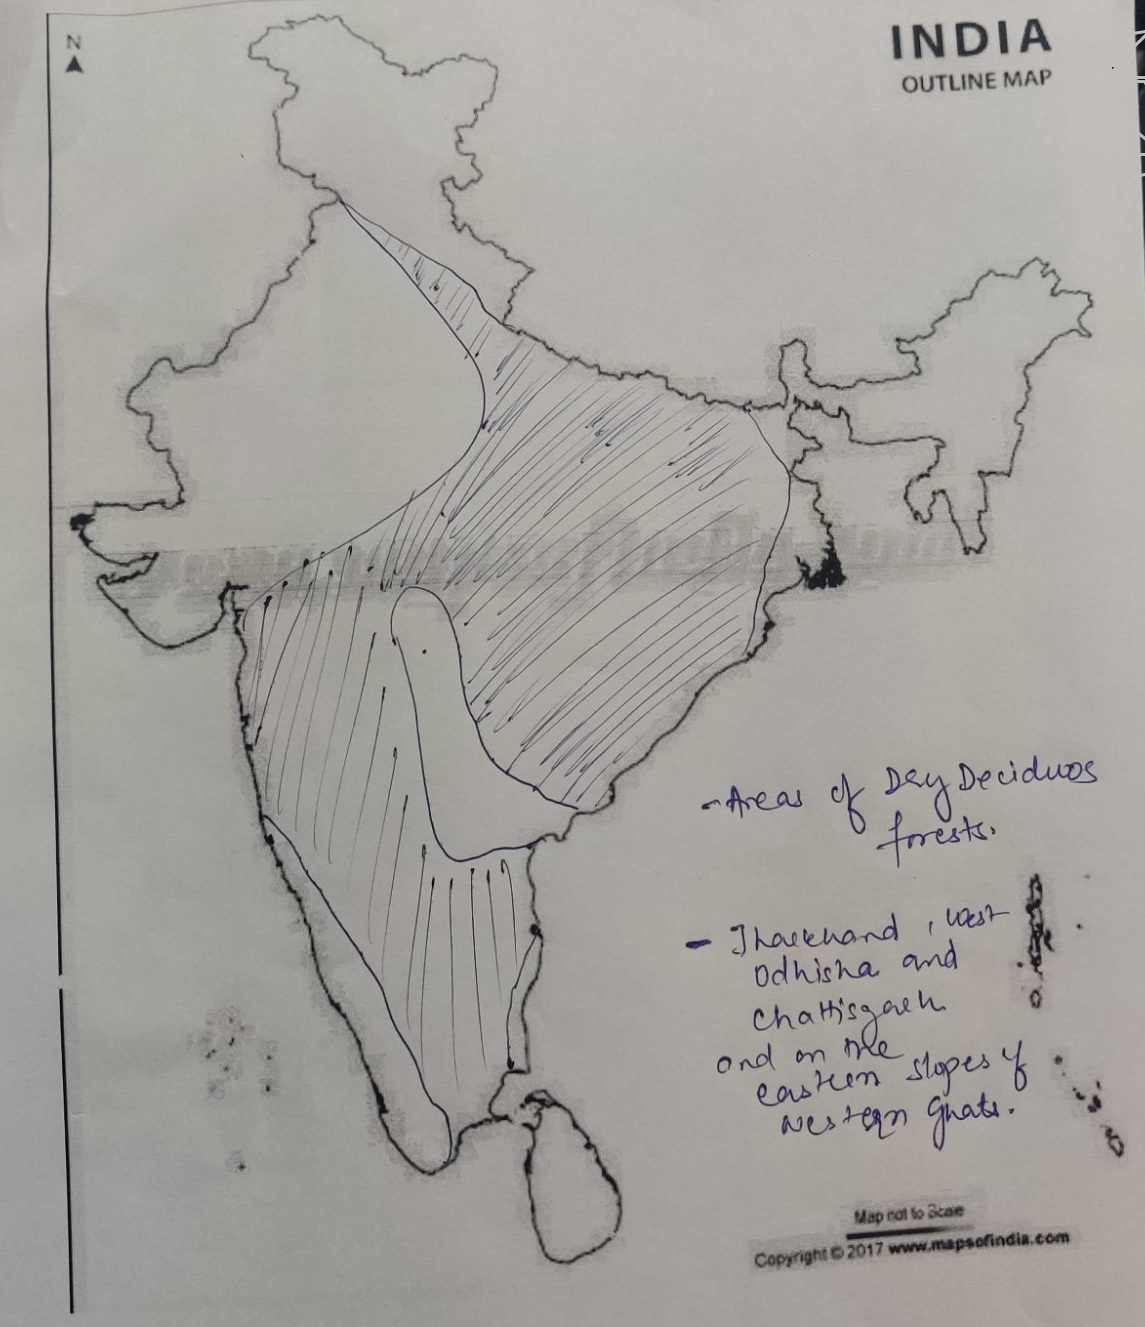 On an outline map of India, Mark the areas of dry deciduous forests